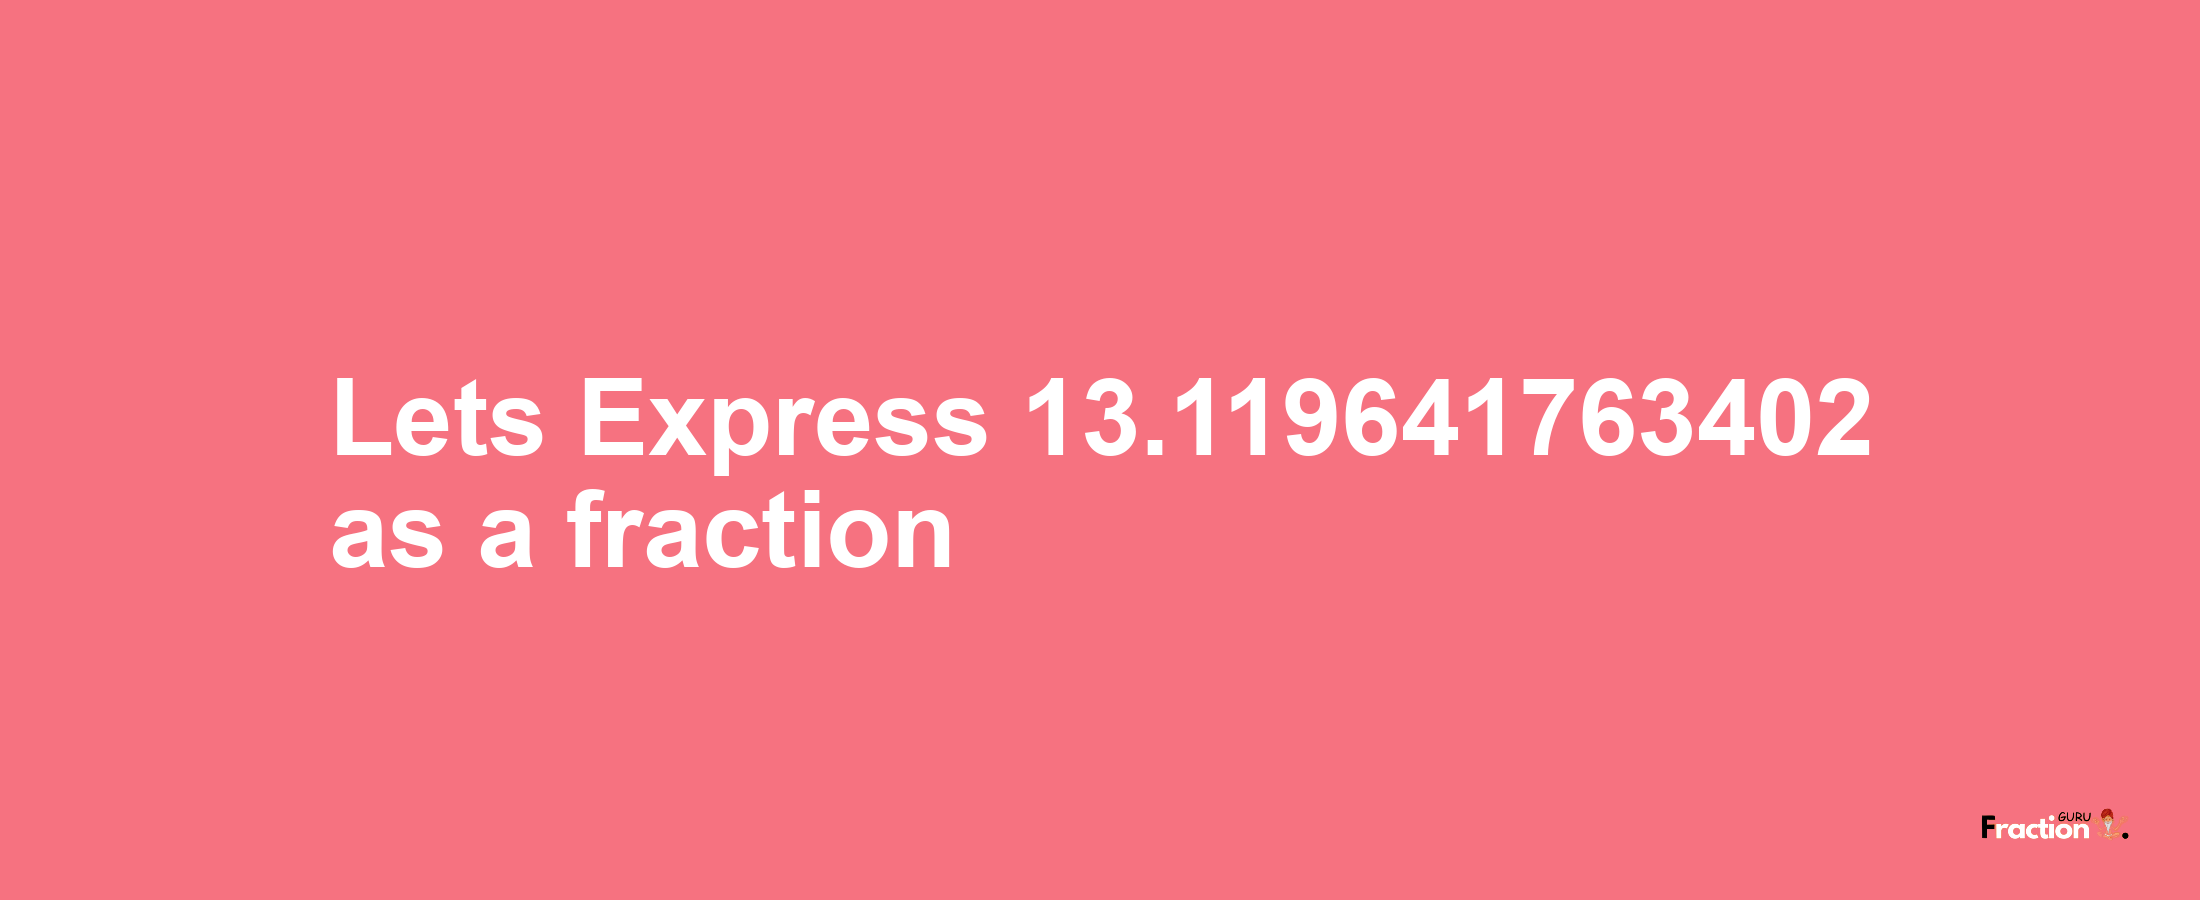 Lets Express 13.119641763402 as afraction